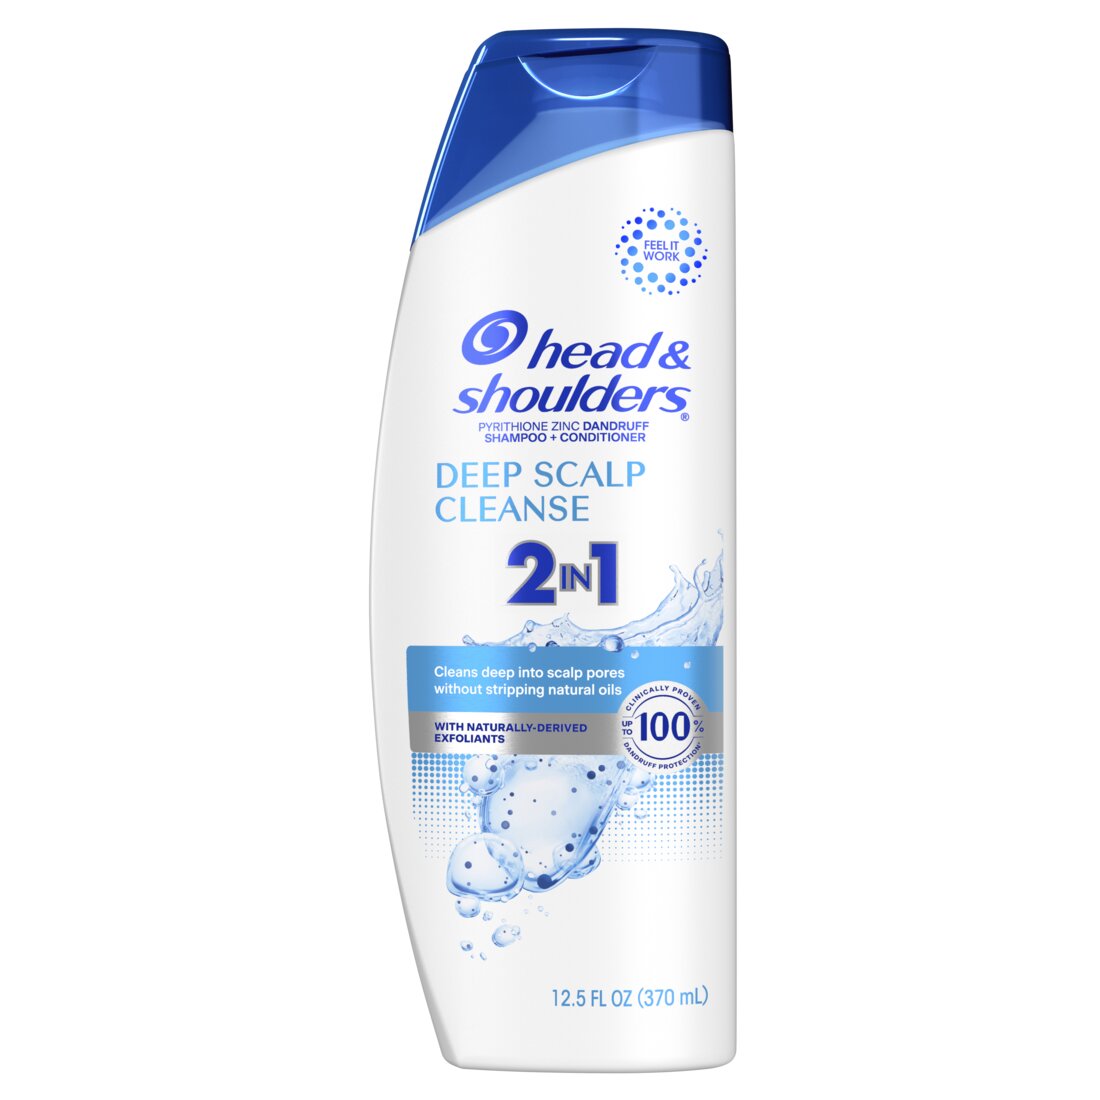 Head & Shoulders 2 in 1 Dandruff Shampoo and Conditioner Deep Scalp Cleanse - 12.5oz/6pk